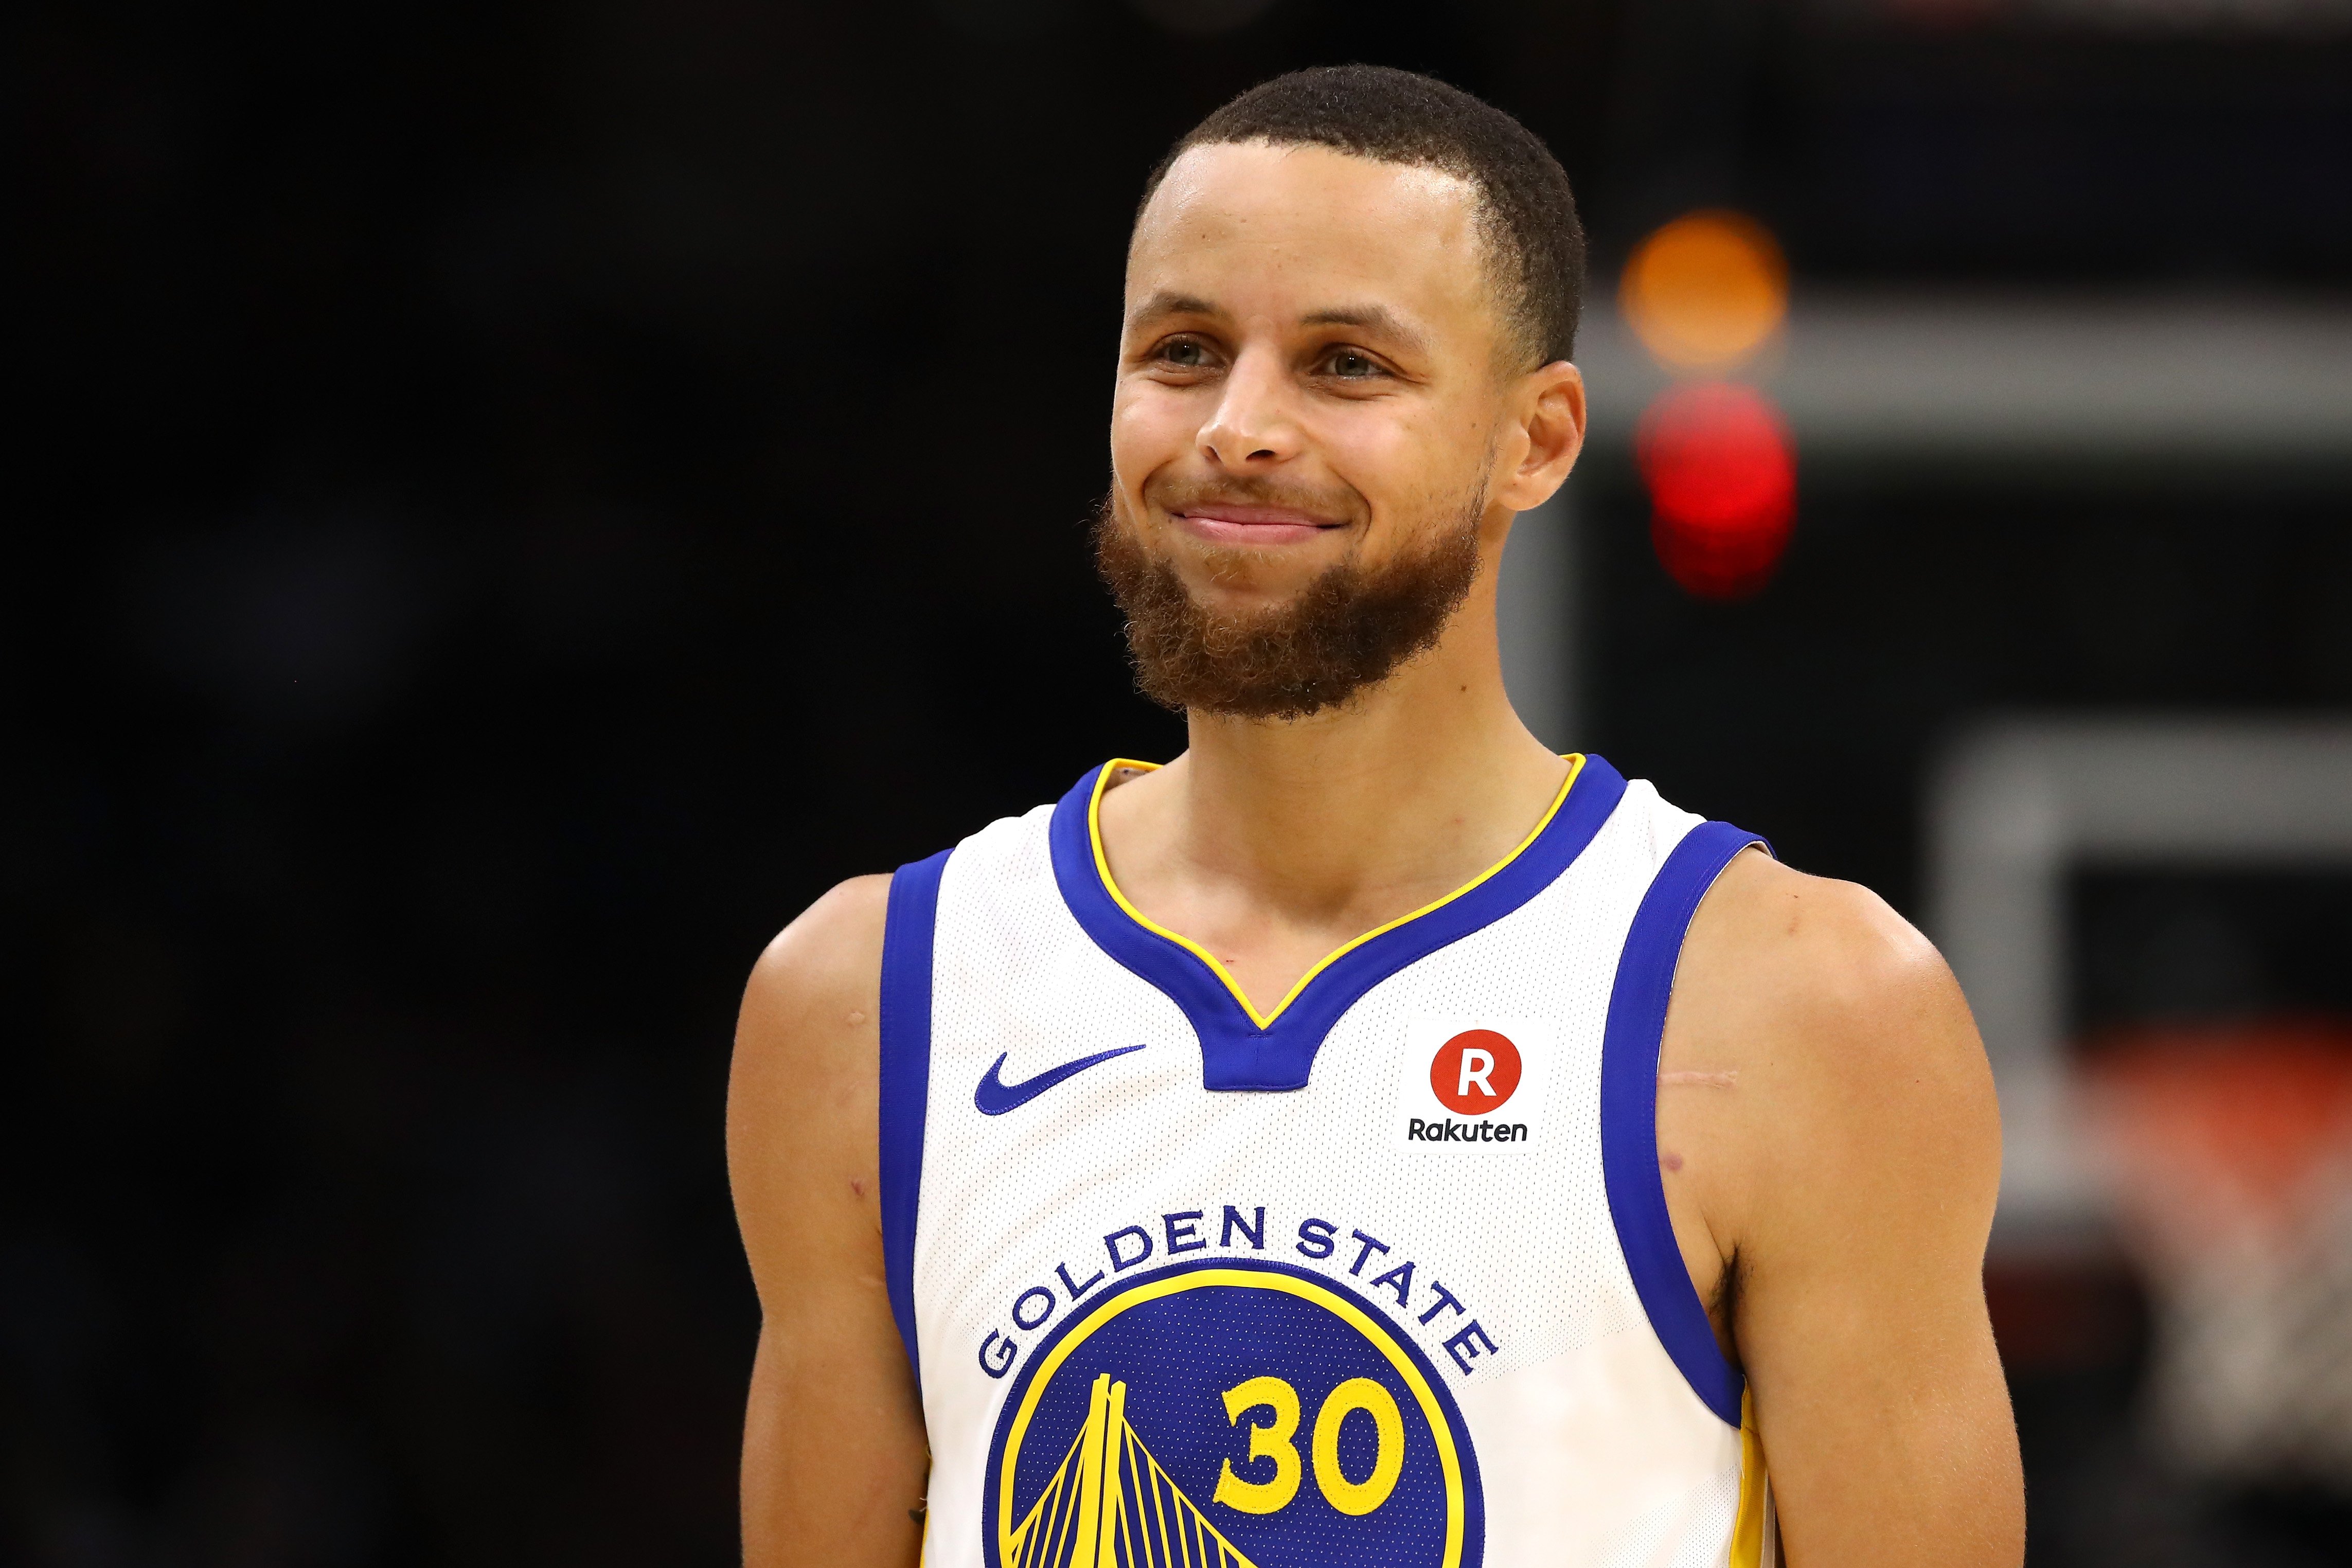 Stephen Curry during Game 4 against the Cleveland Cavaliers at the 2018 NBA Finals at Quicken Loans Arena on June 8, 2018 in Cleveland, Ohio.| Source: Getty Images